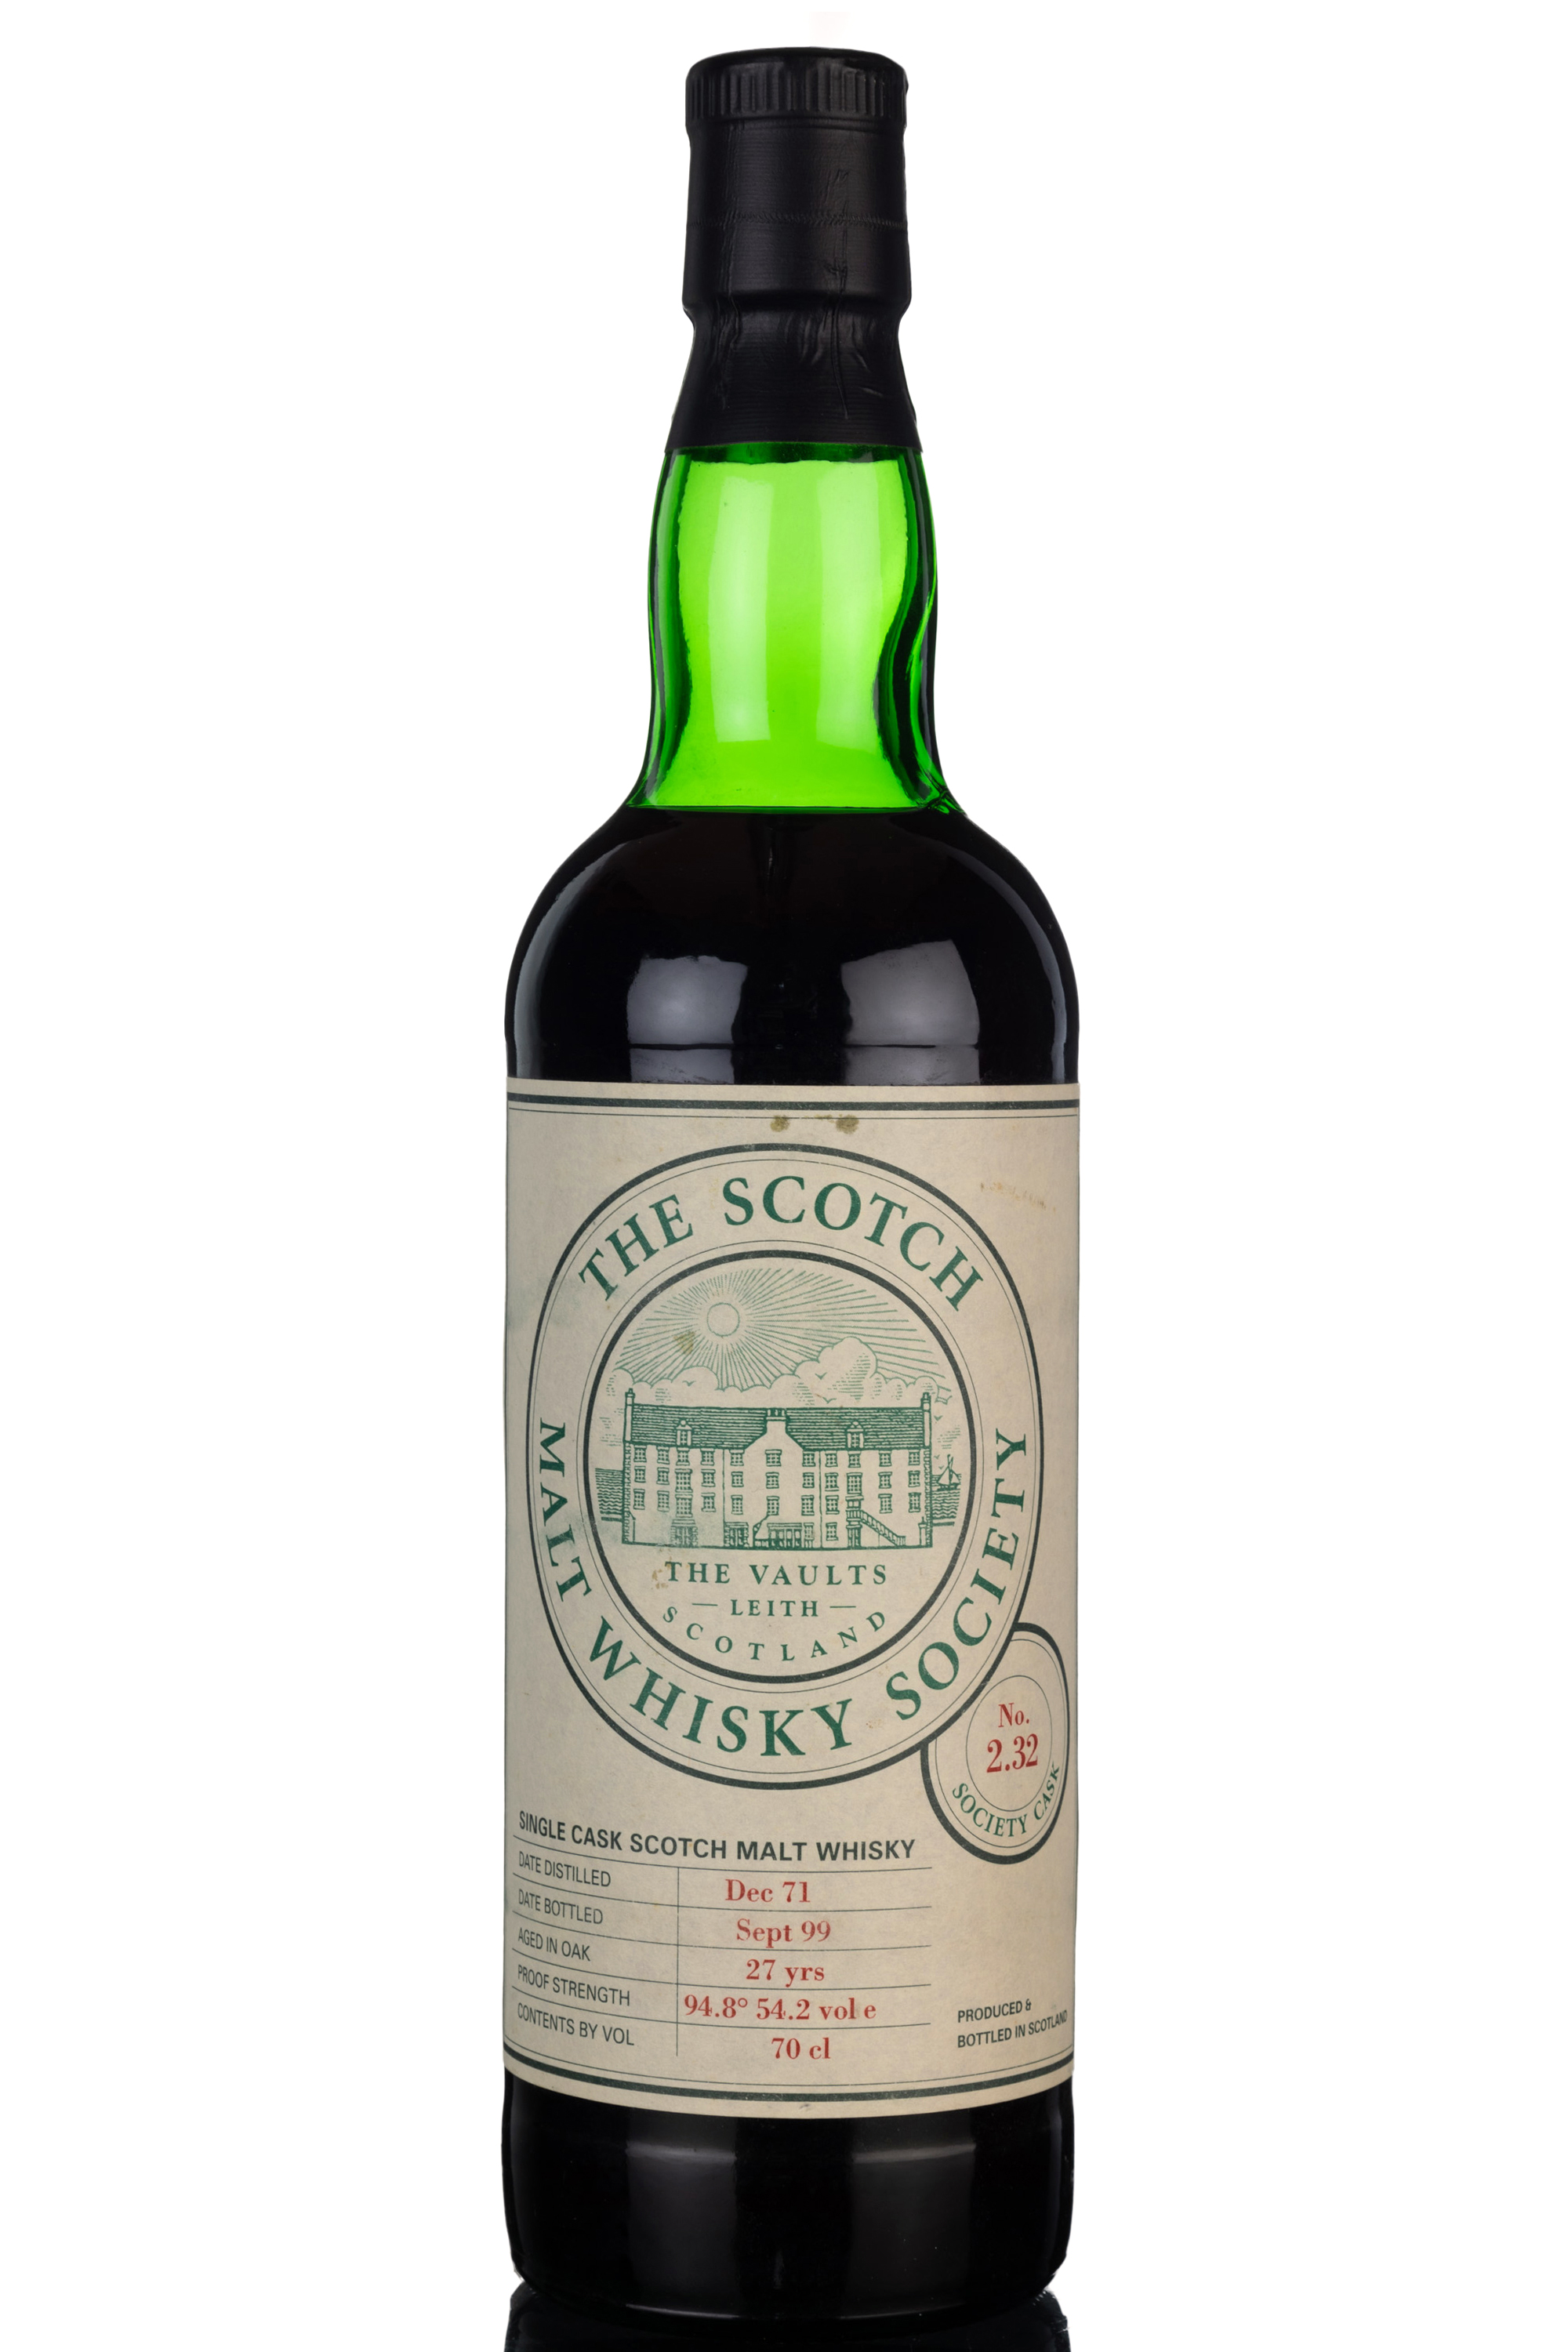 Glenlivet 1971-1999 - 27 Year Old - SMWS 2.32 - Prunes & Chocolate